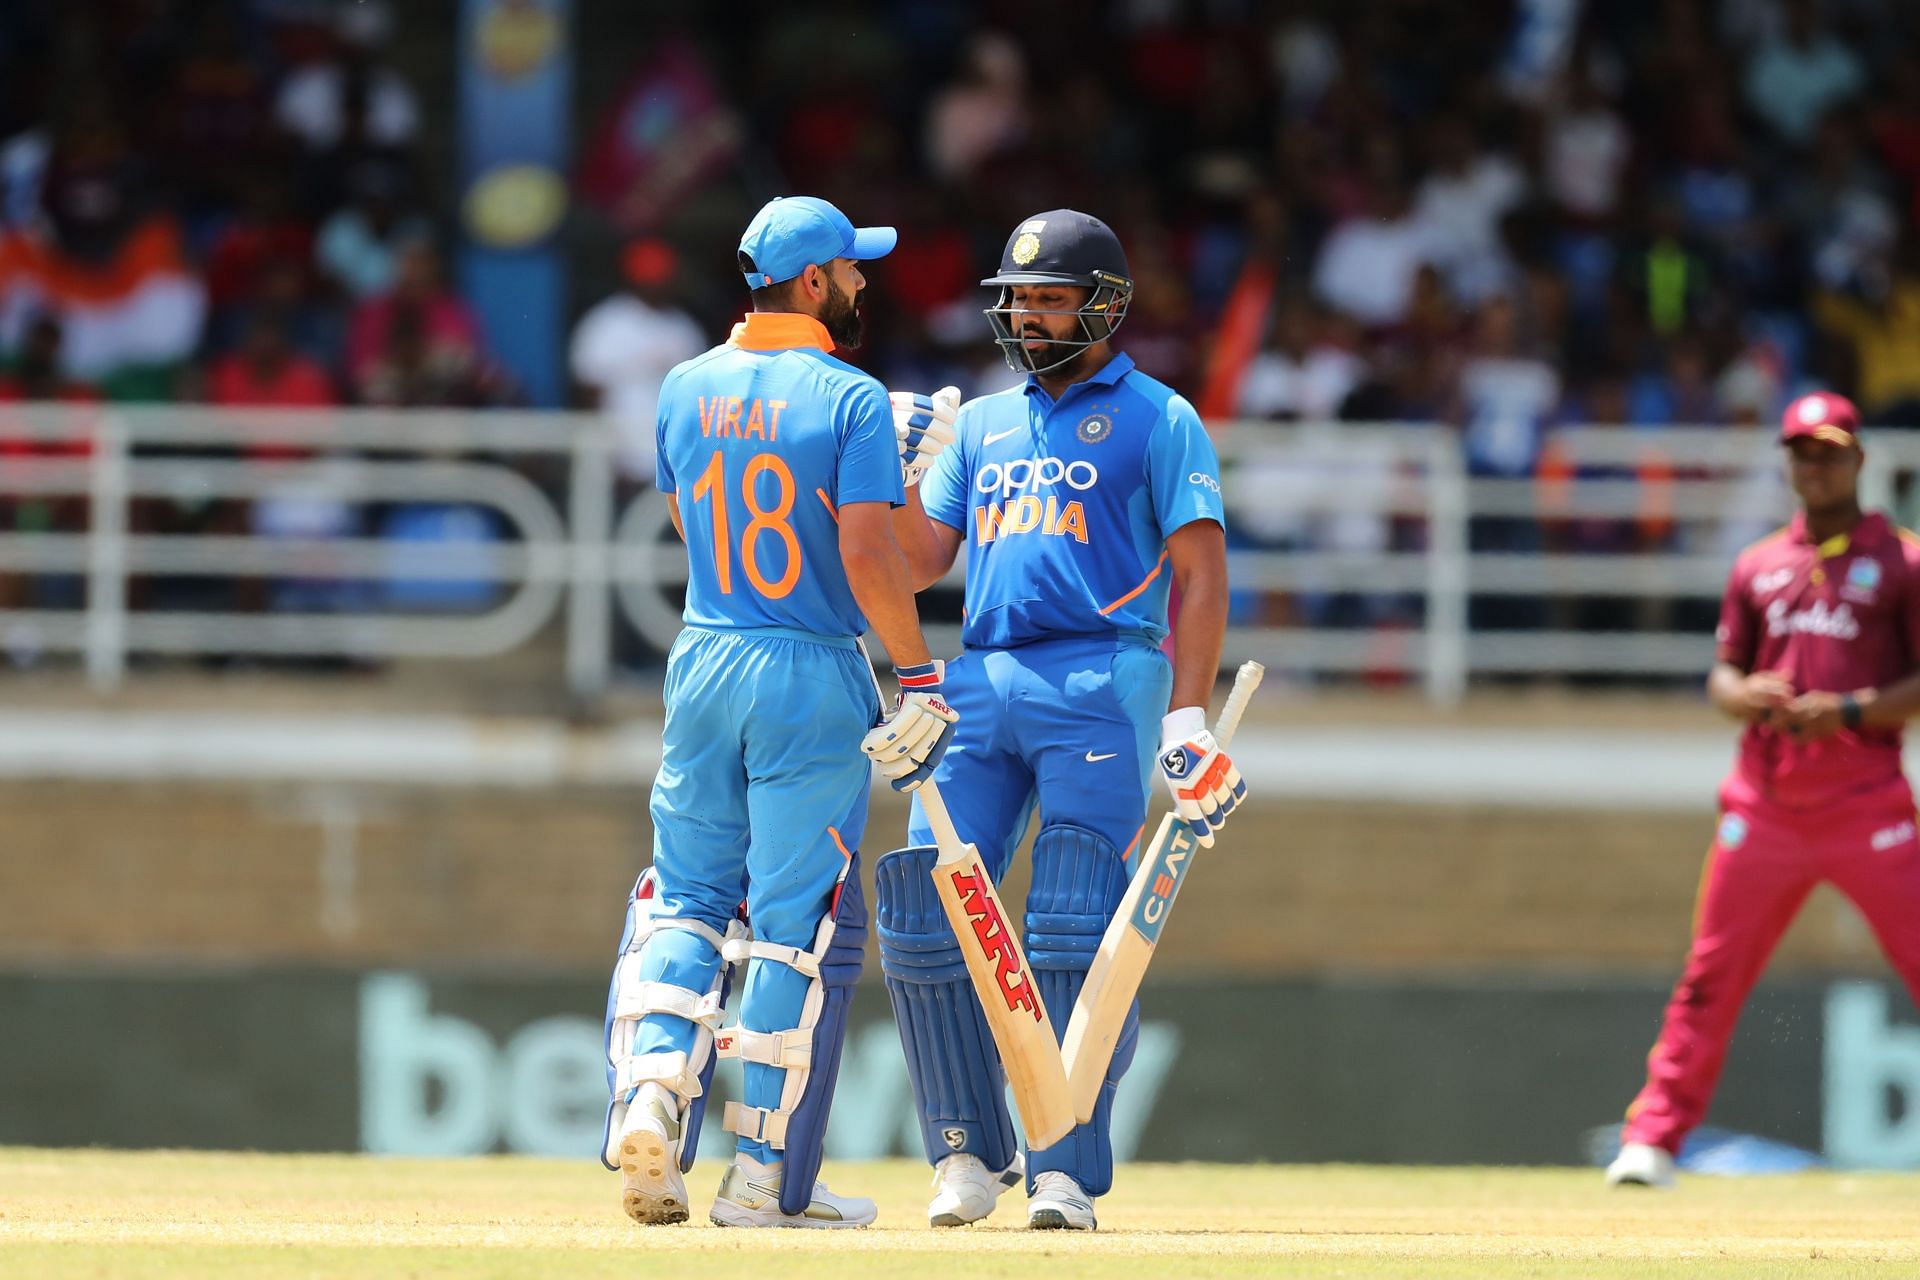 Rohit Sharma and Virat Kohli are the top run-getters for India against West Indies in ODIs